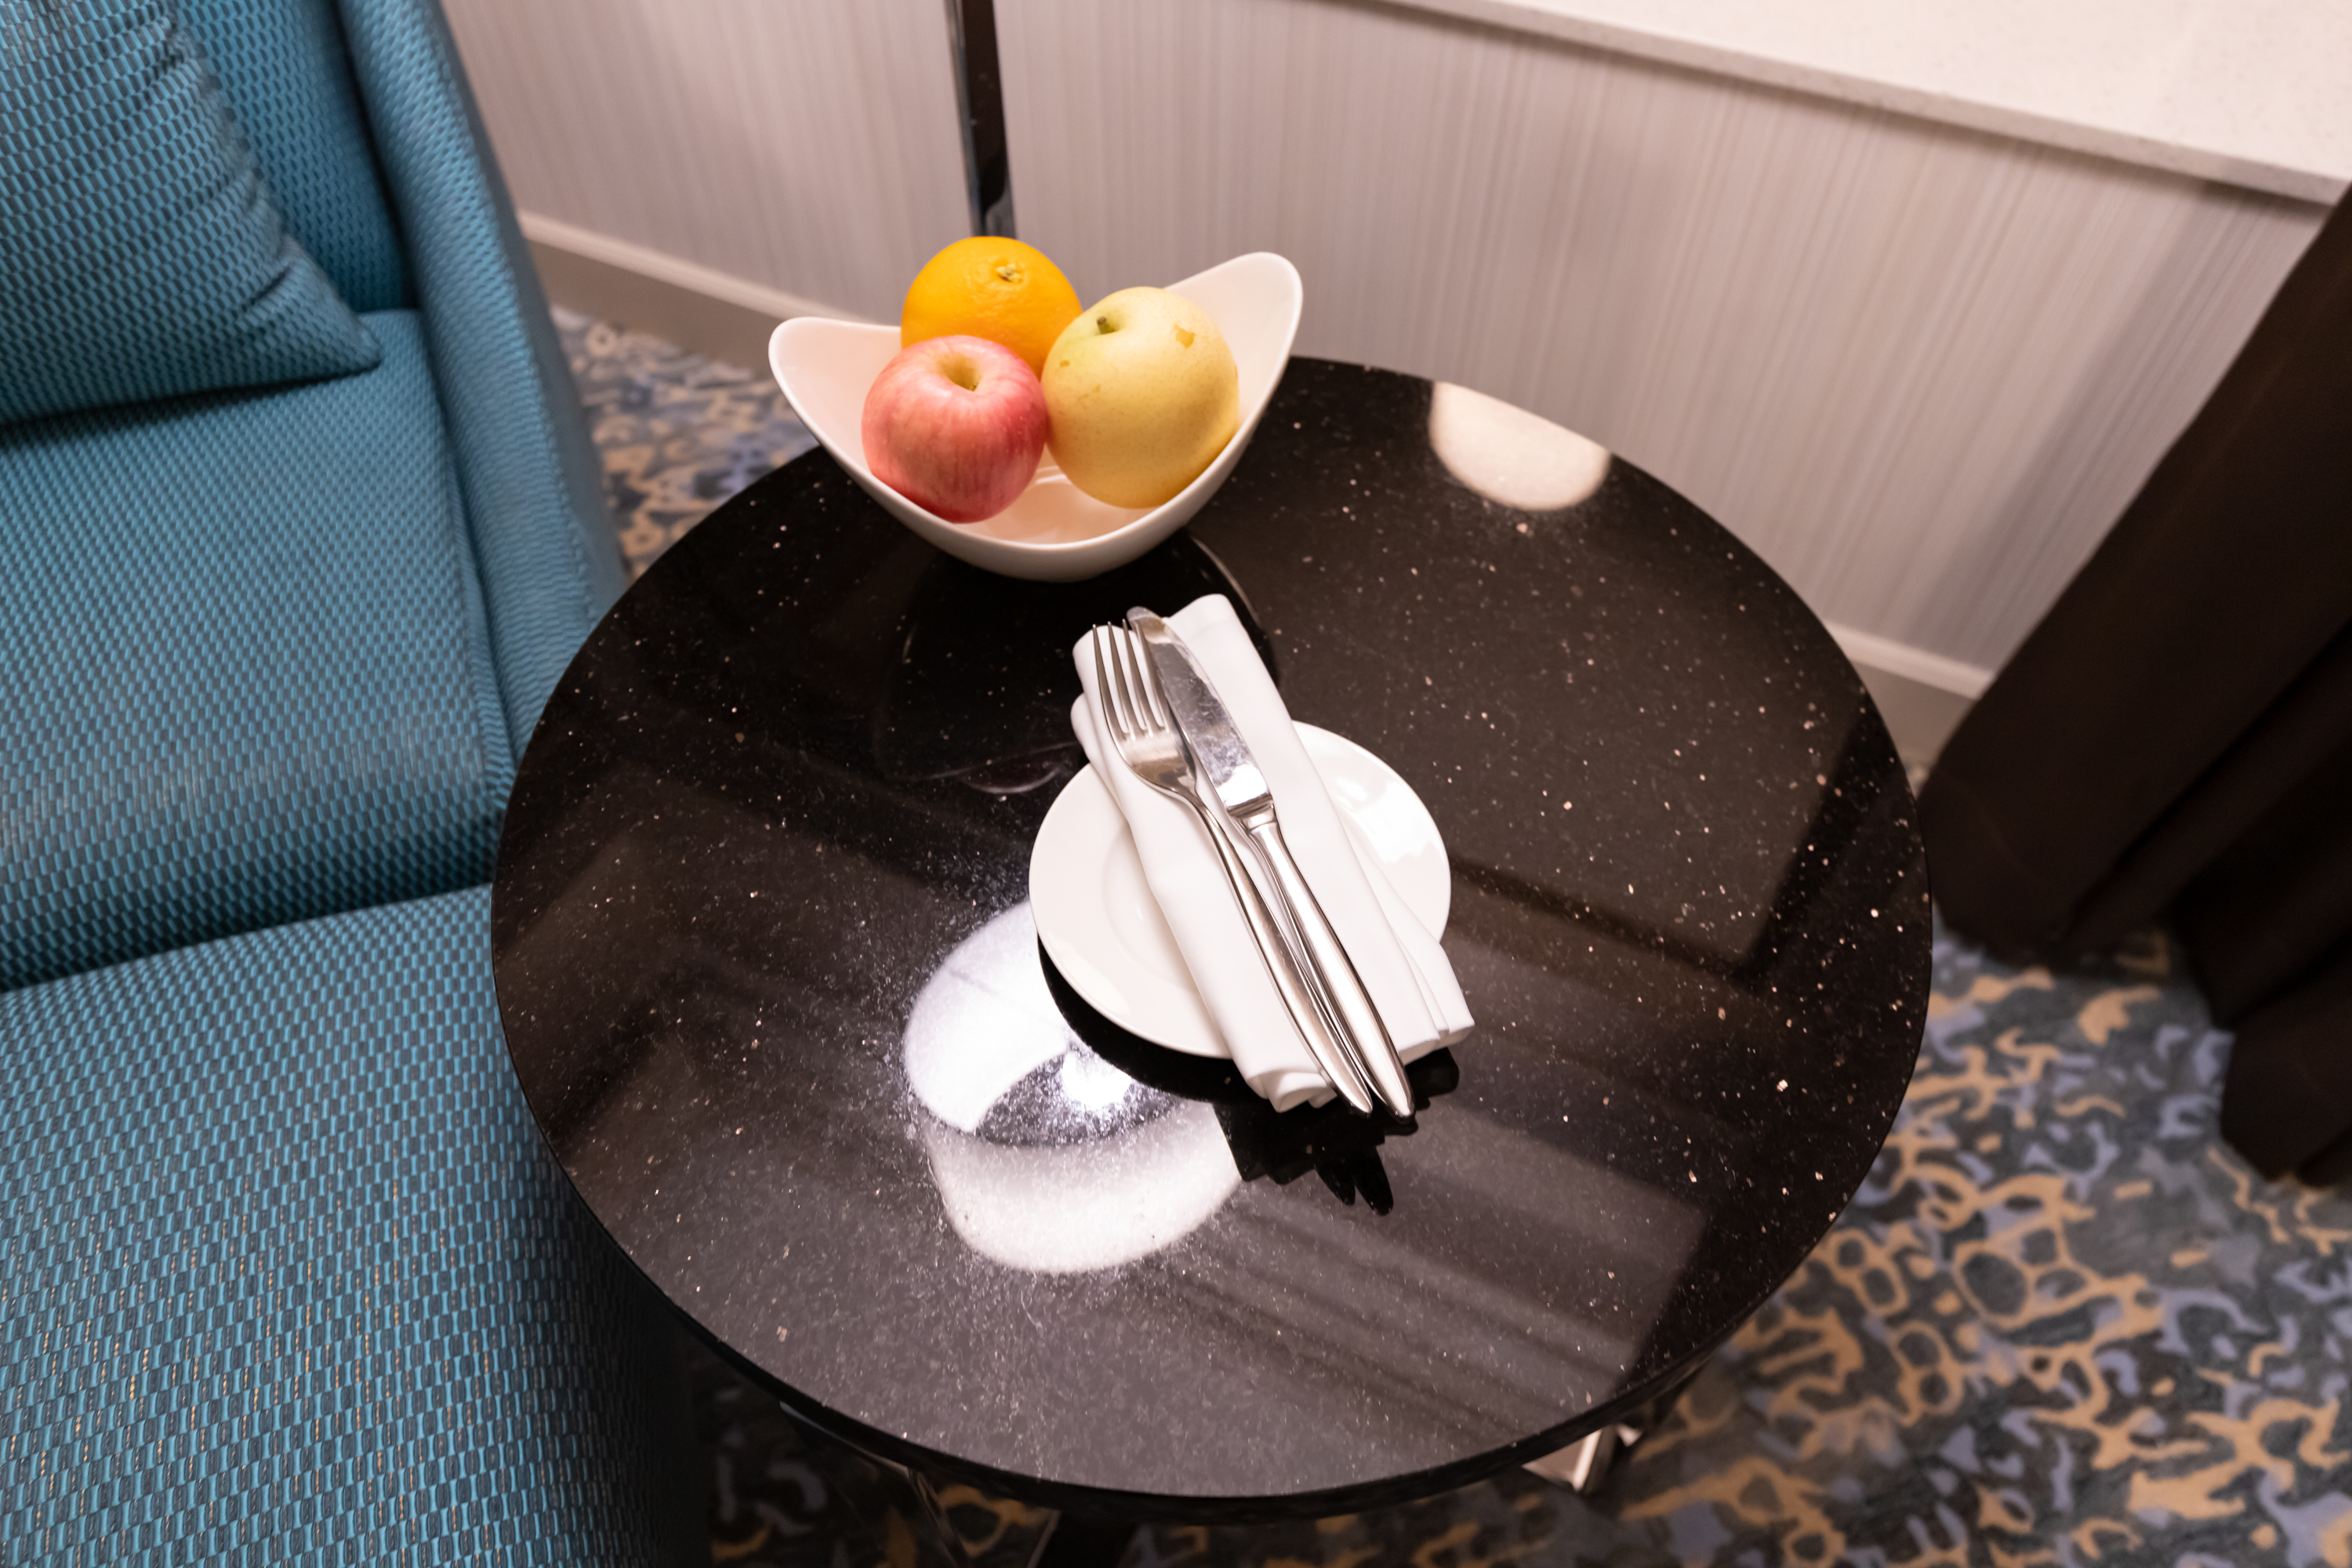 a bowl of fruit and utensils on a table